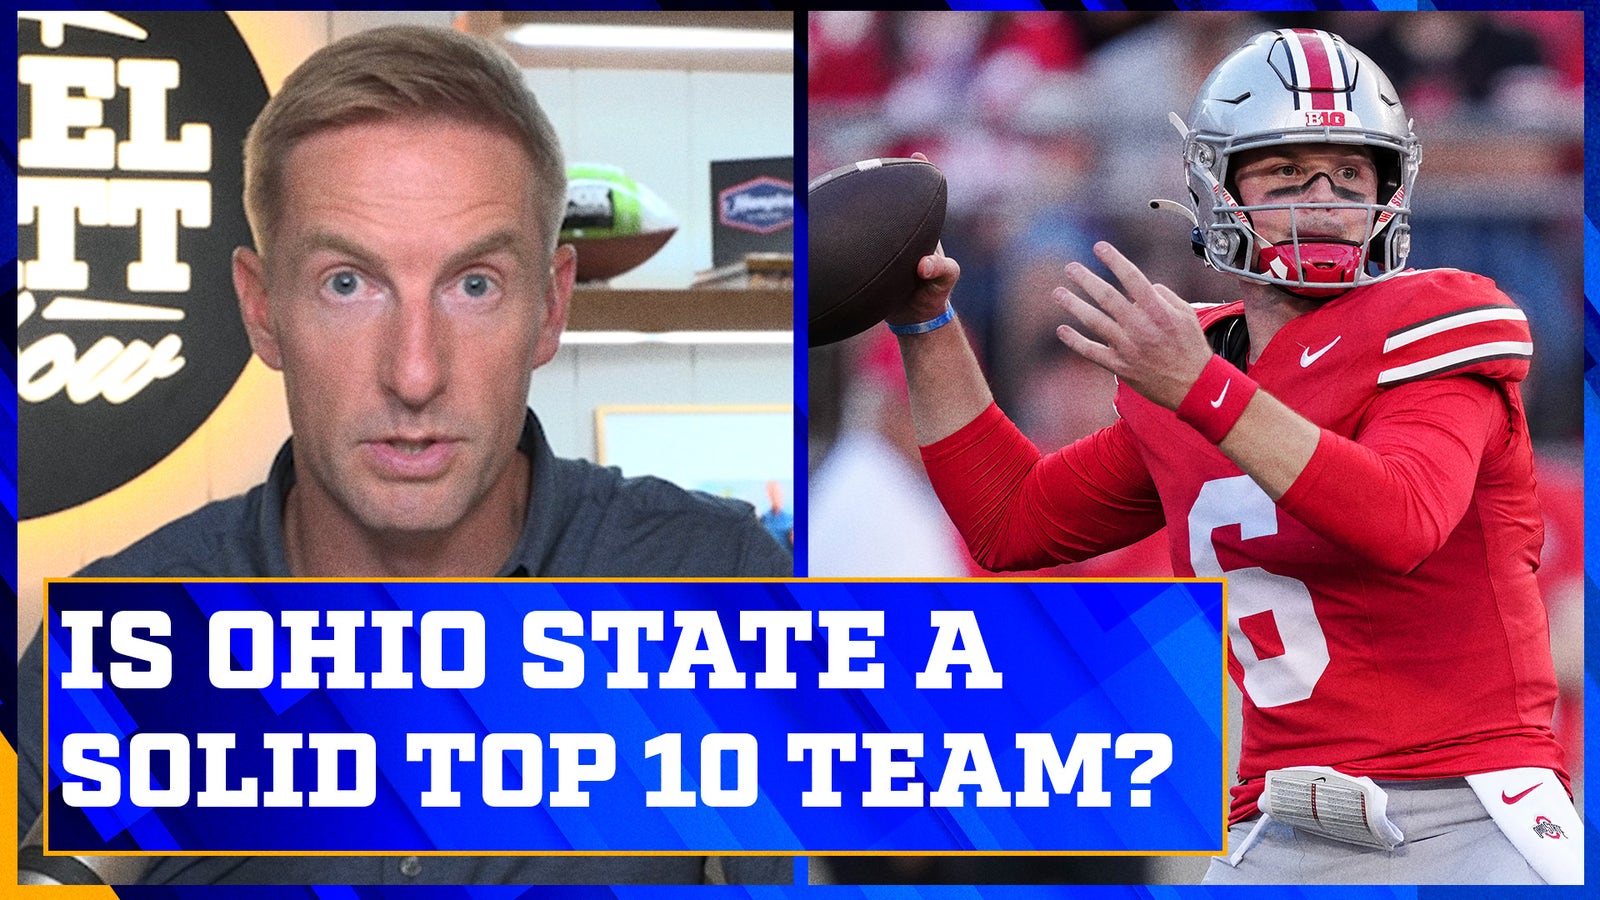 Have Buckeyes solidified themselves as a top 10 team?